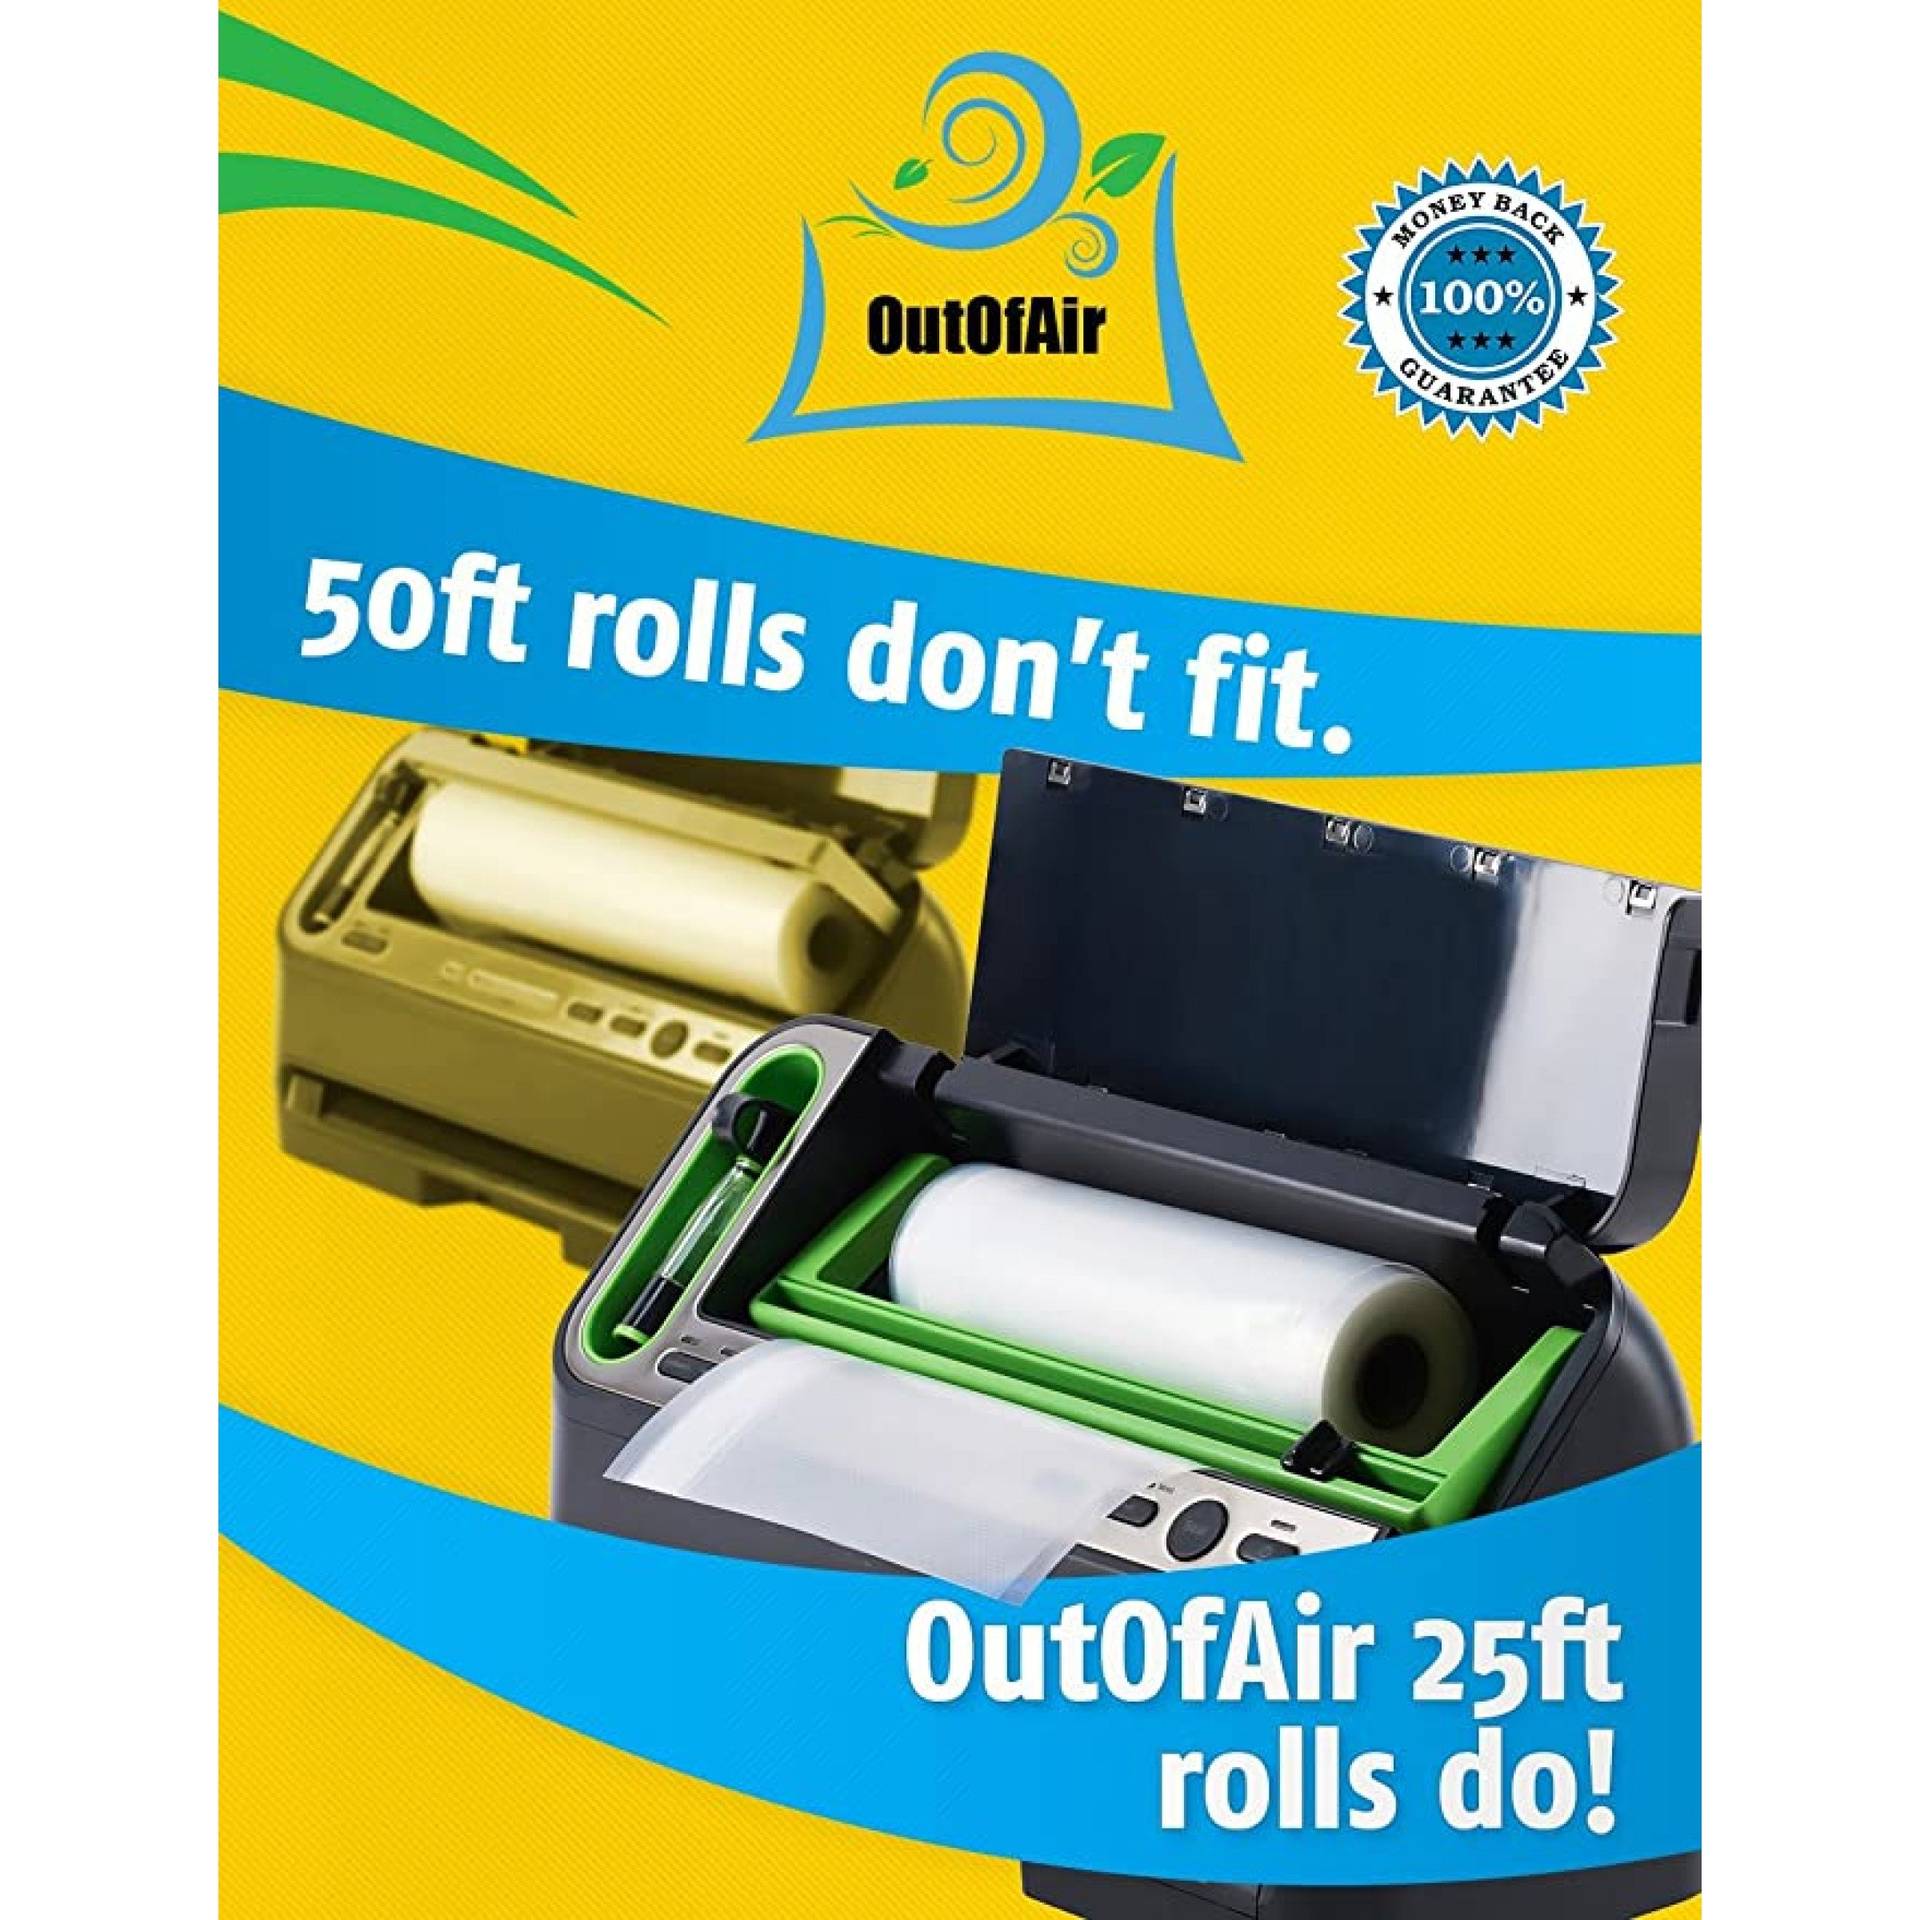 8x100' Roll Vacuum Sealer Bags with Box and Built in Bag Cutter - 10 Rolls  Bulk Case - OutOfAir